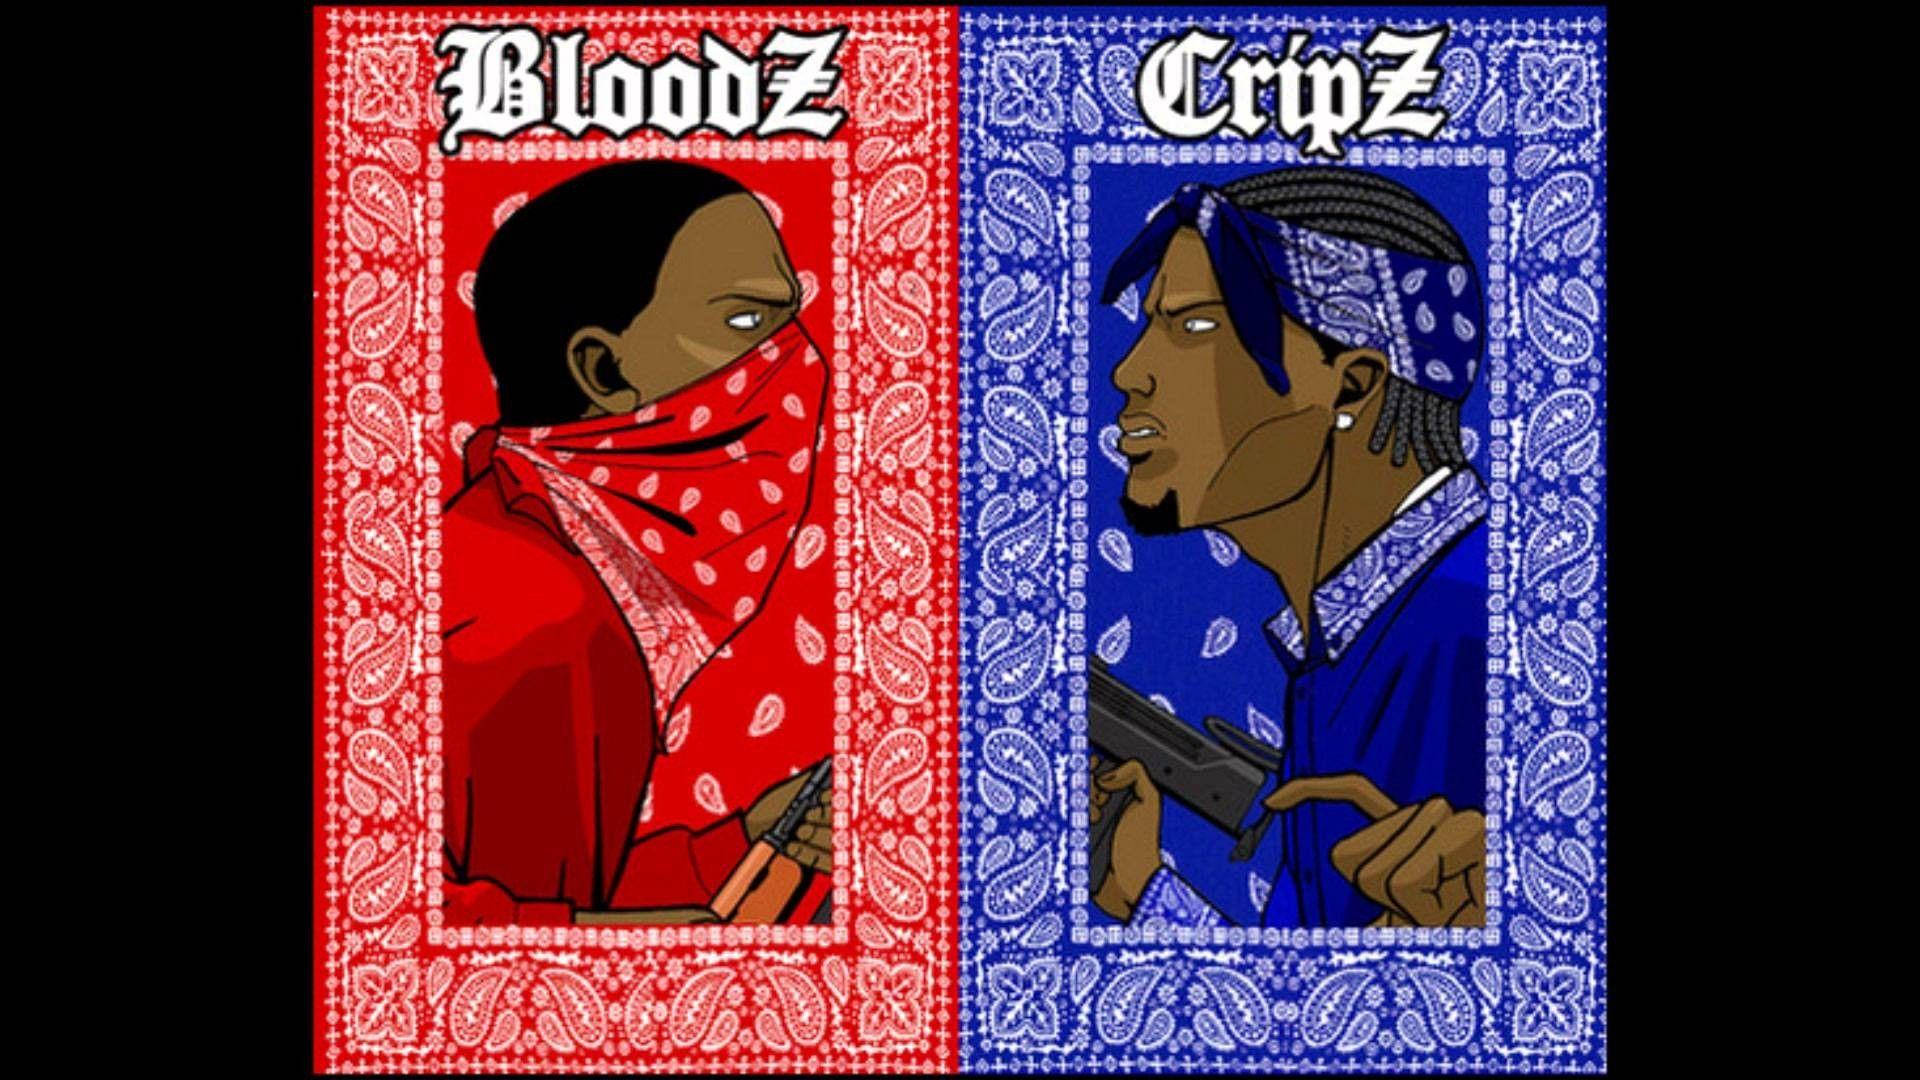 Crip And Bloodz Rival Gang Background